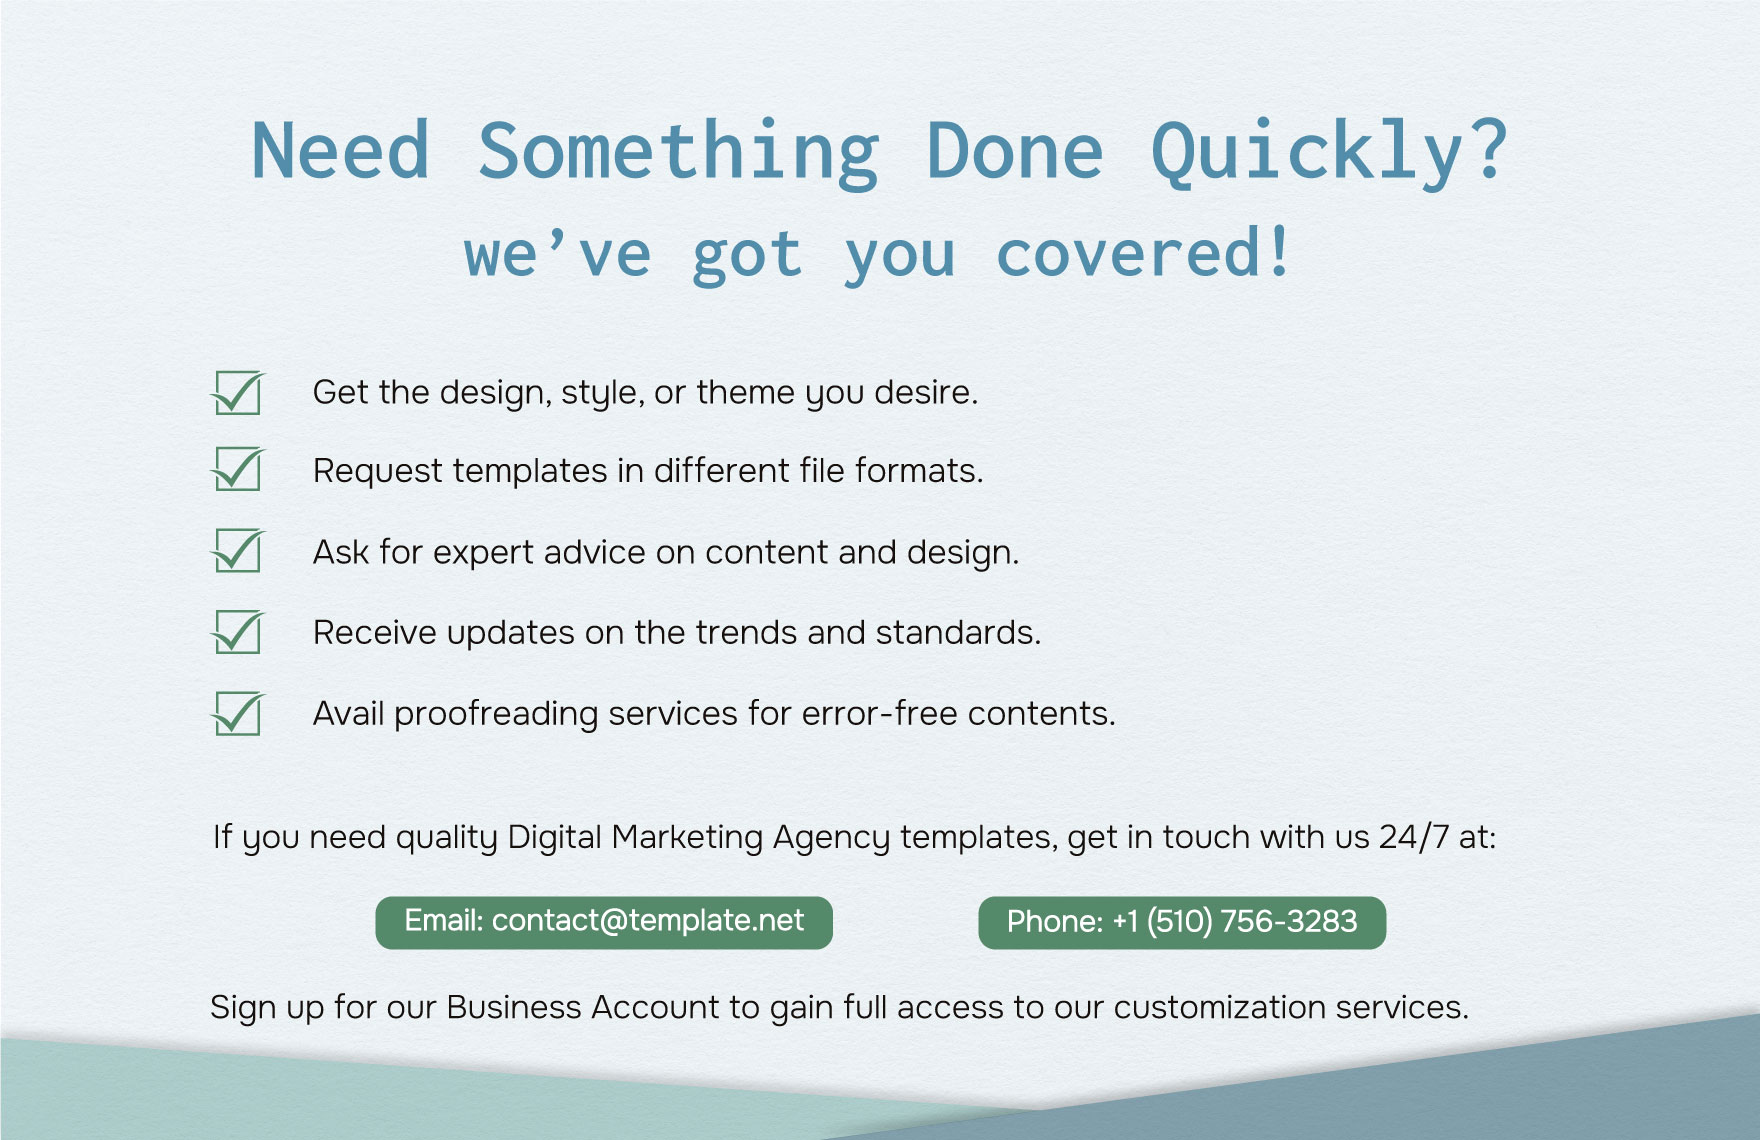 Digital Marketing Agency Overtime Request Form Template